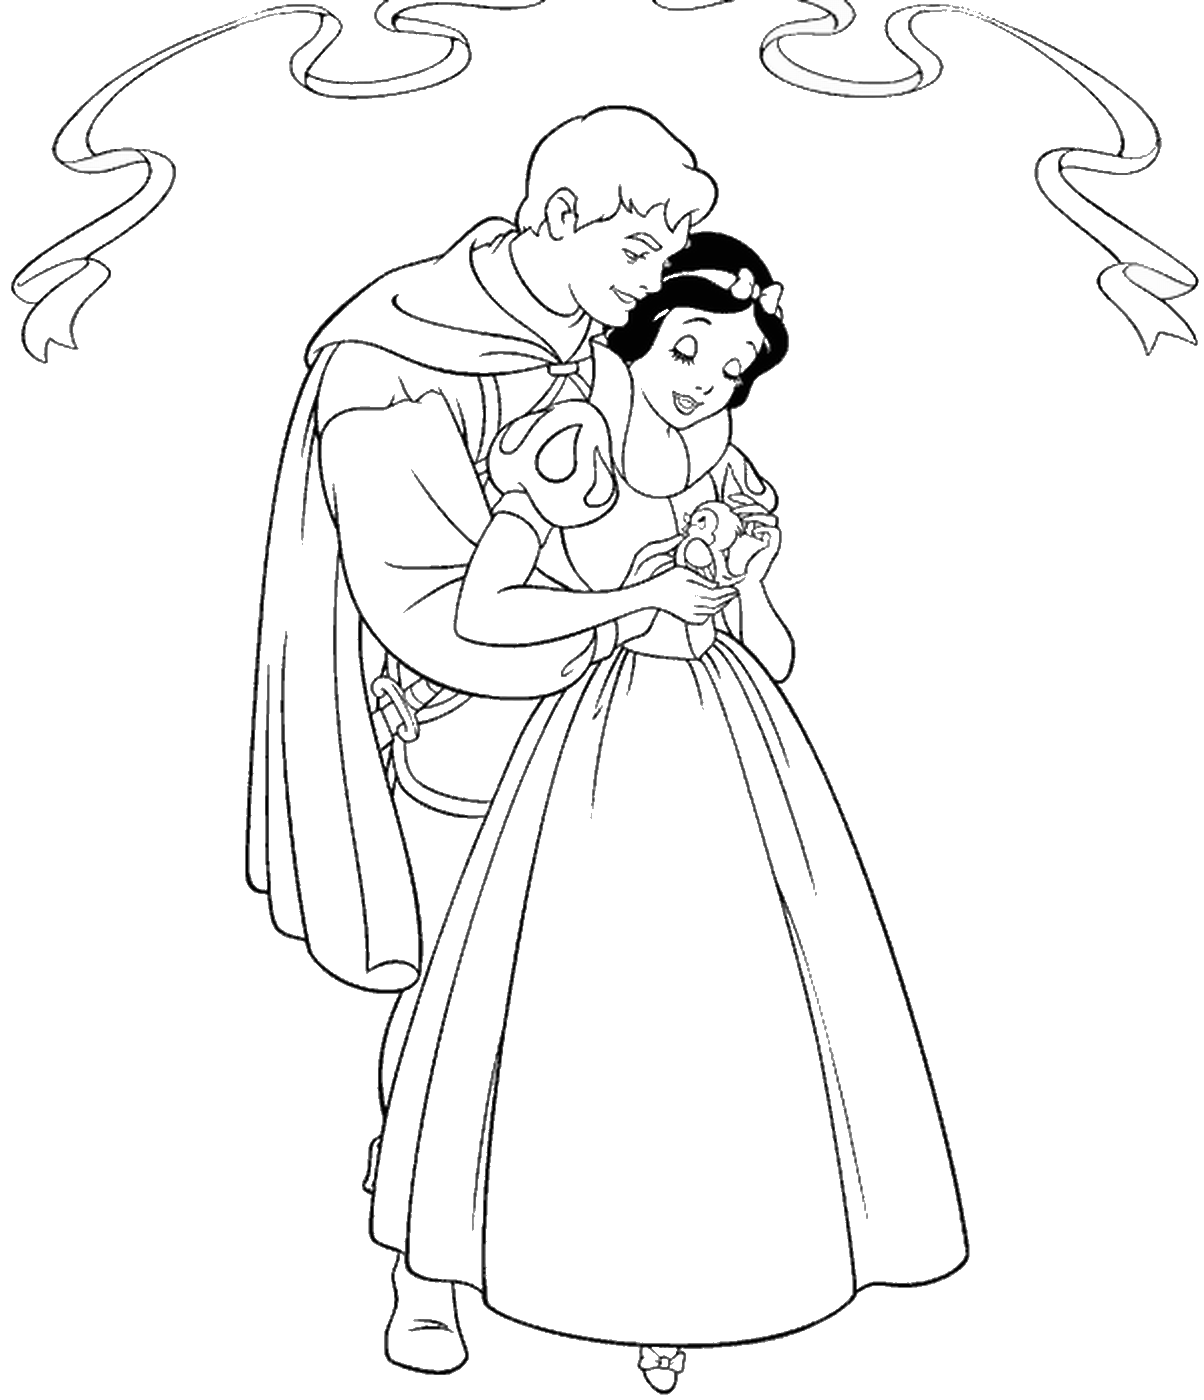 Snow White Coloring Pages Cartoons snow_white_cl_79 Printable 2020 5754 Coloring4free